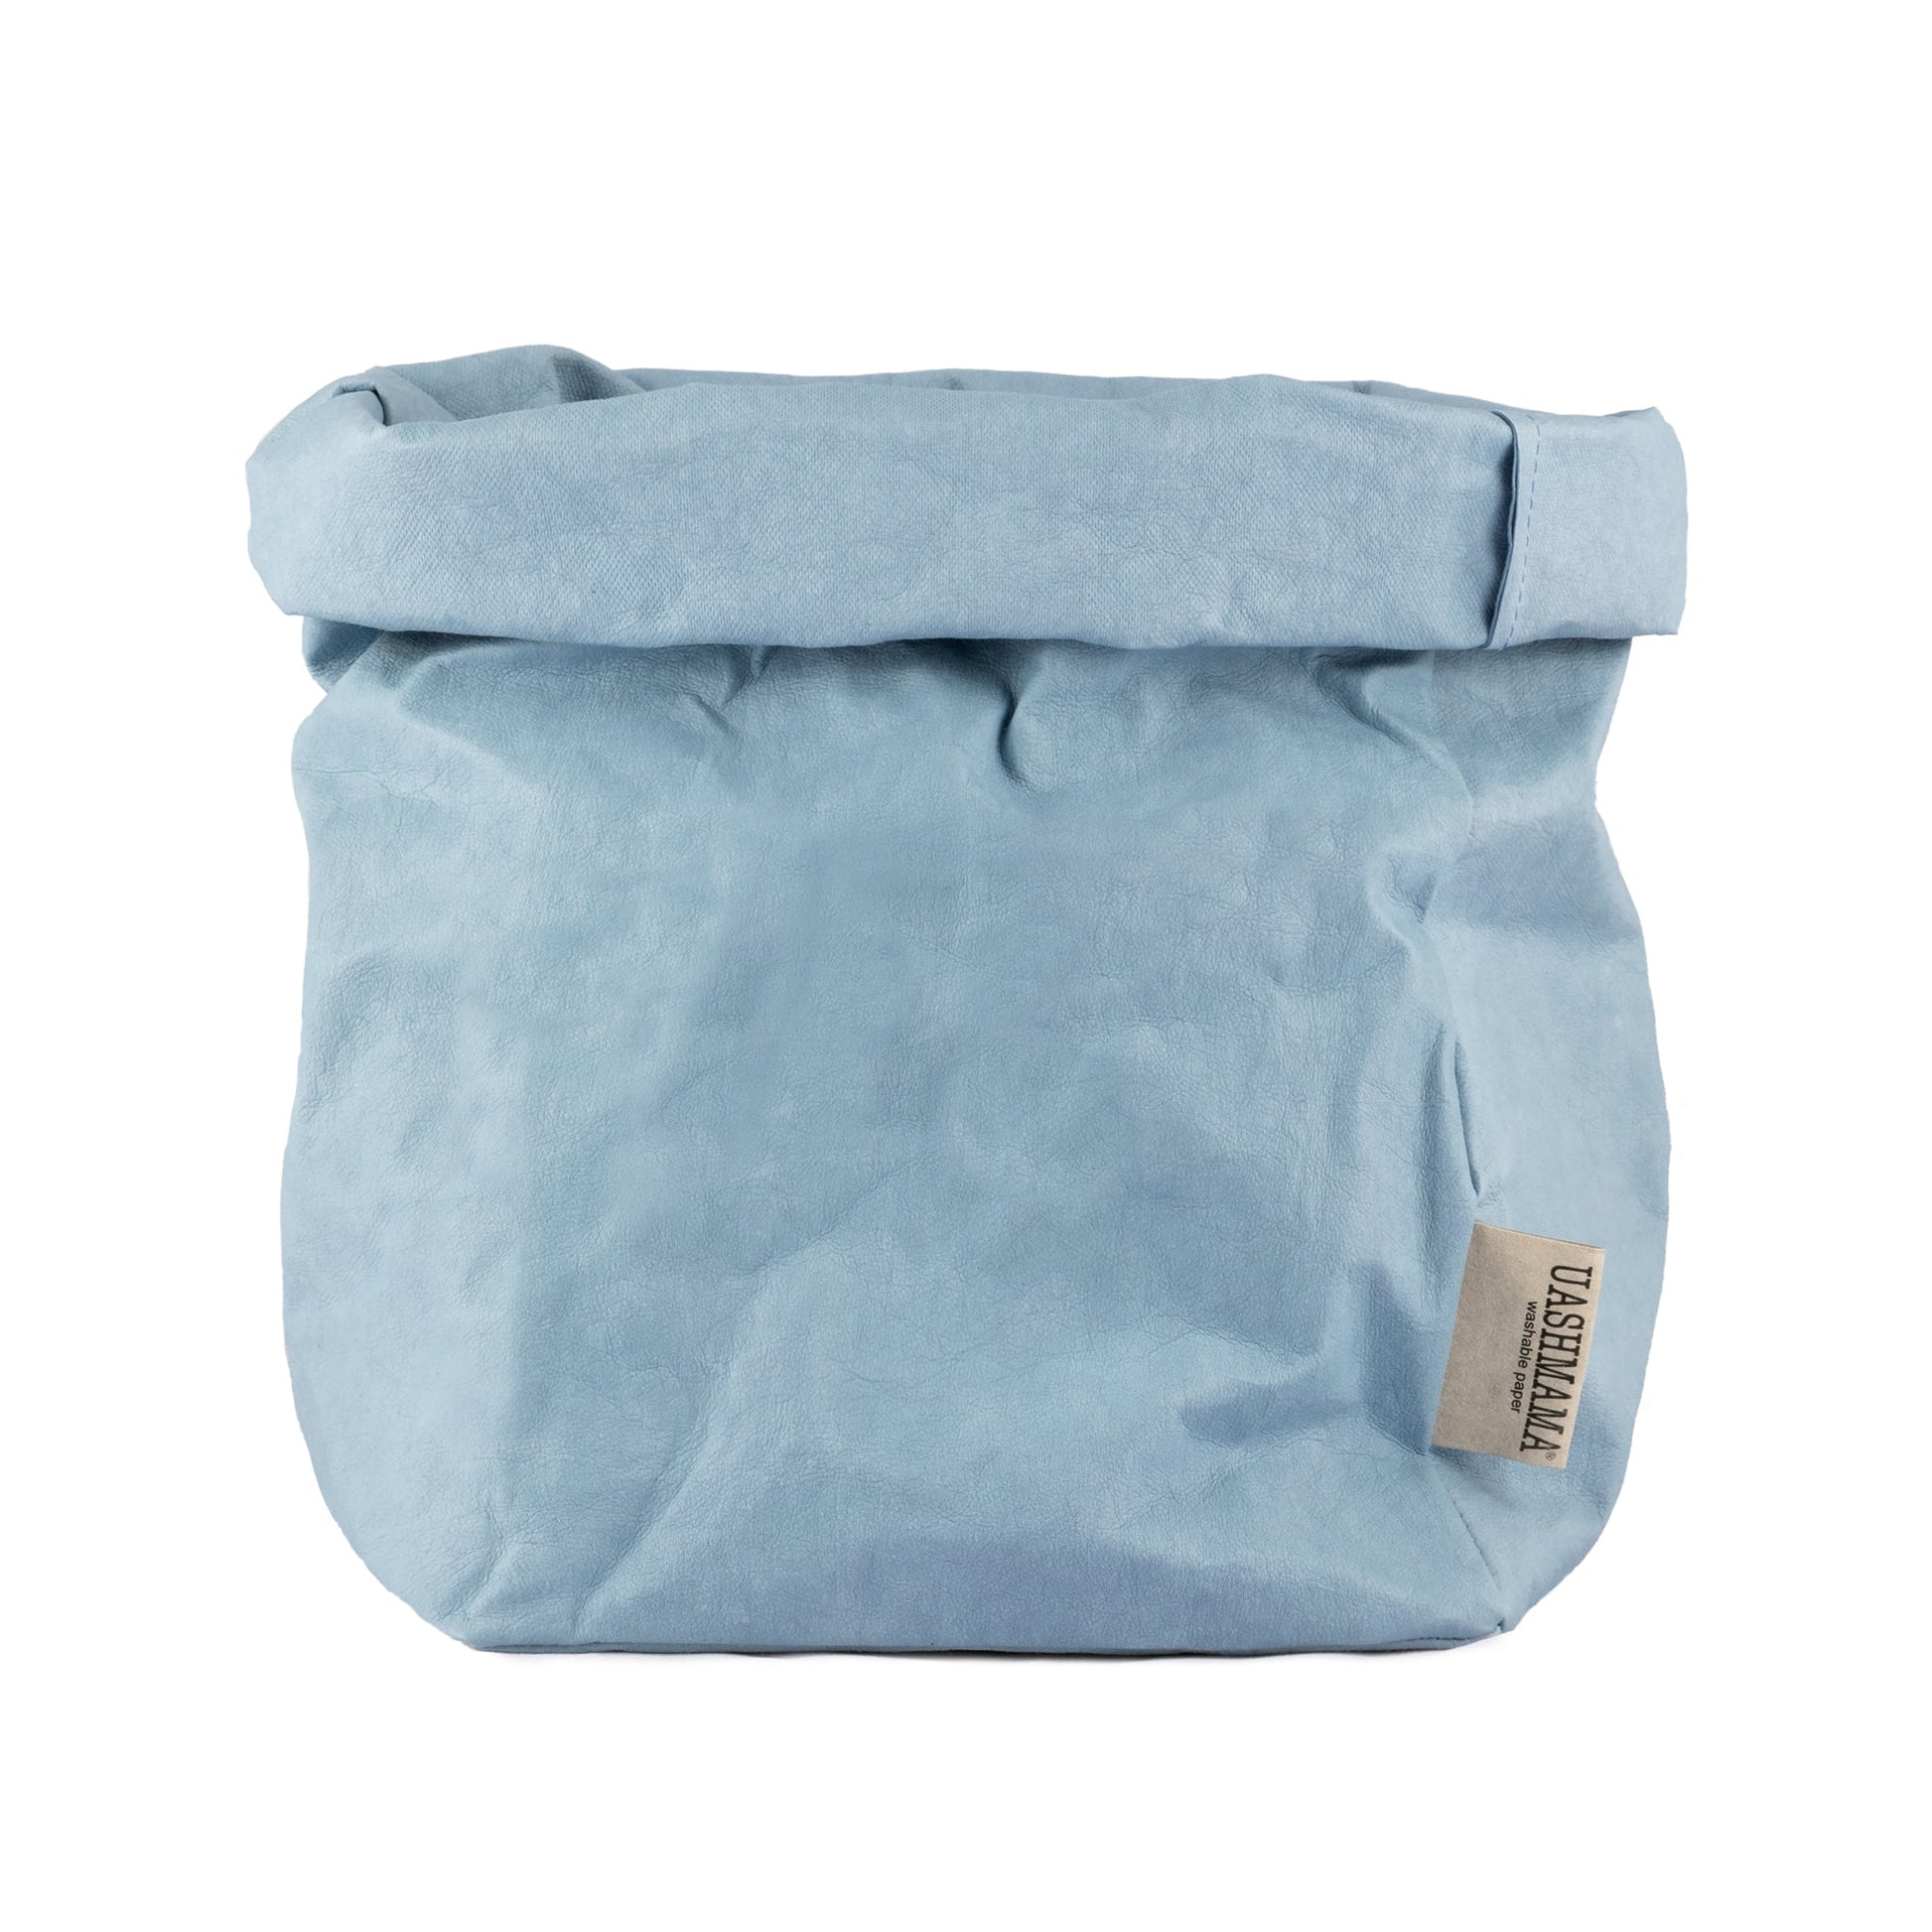 A washable paper bag is shown. The bag is rolled down at the top and features a UASHMAMA logo label on the bottom left corner. The bag pictured is the large plus size in light blue.